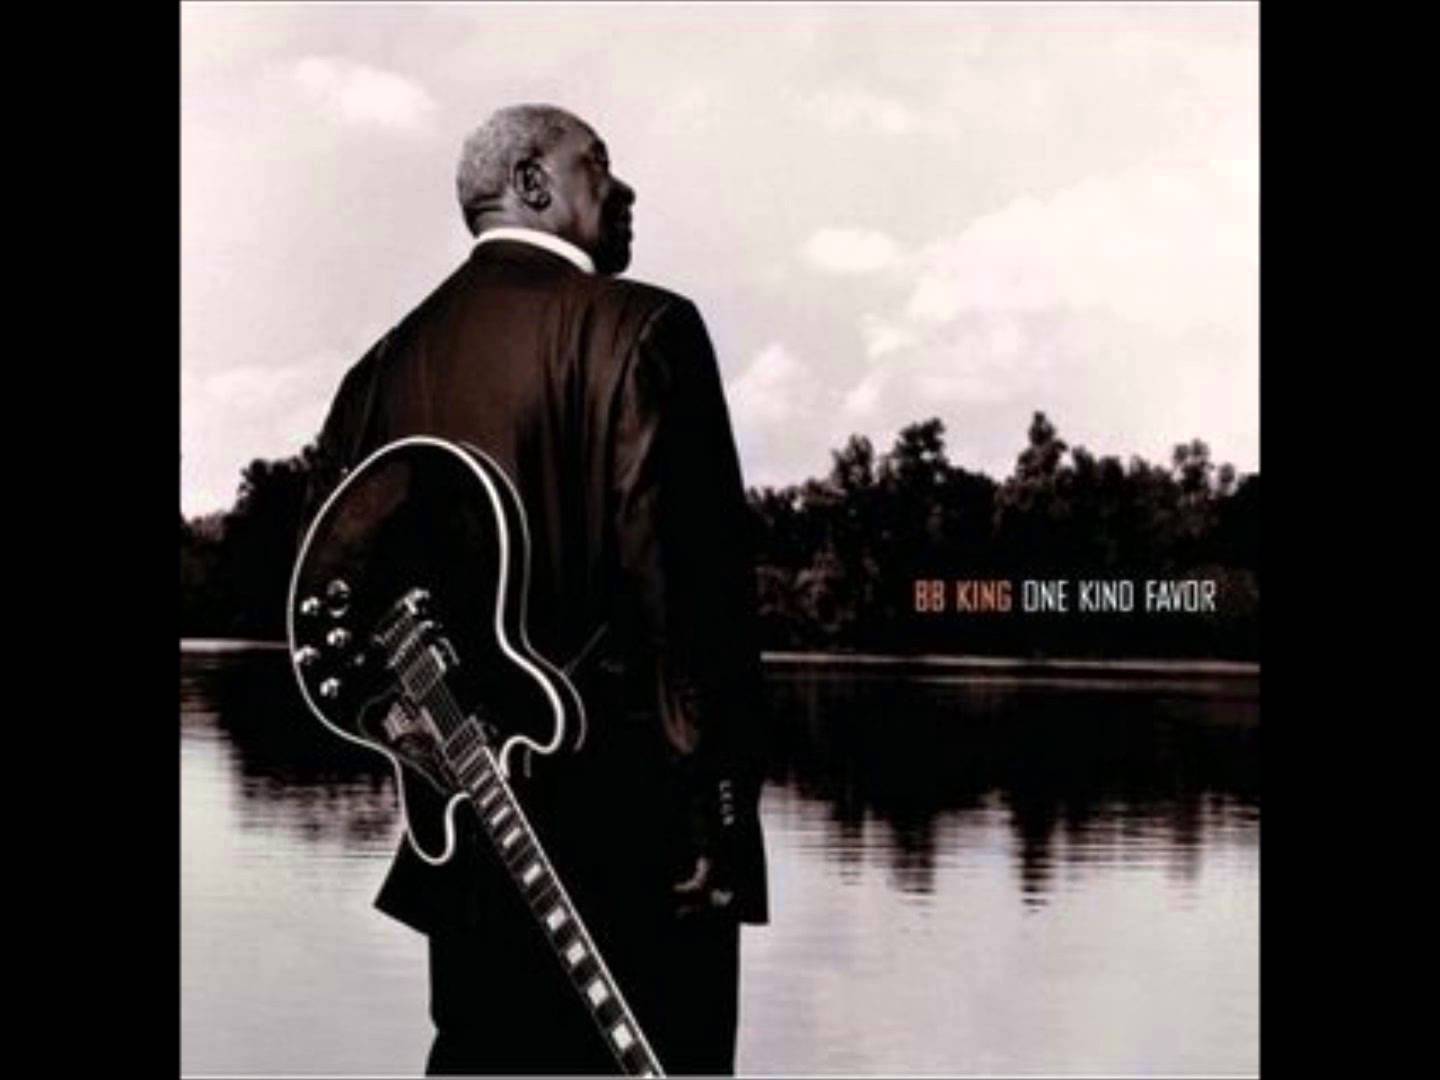 B.B.King - Waiting for your call